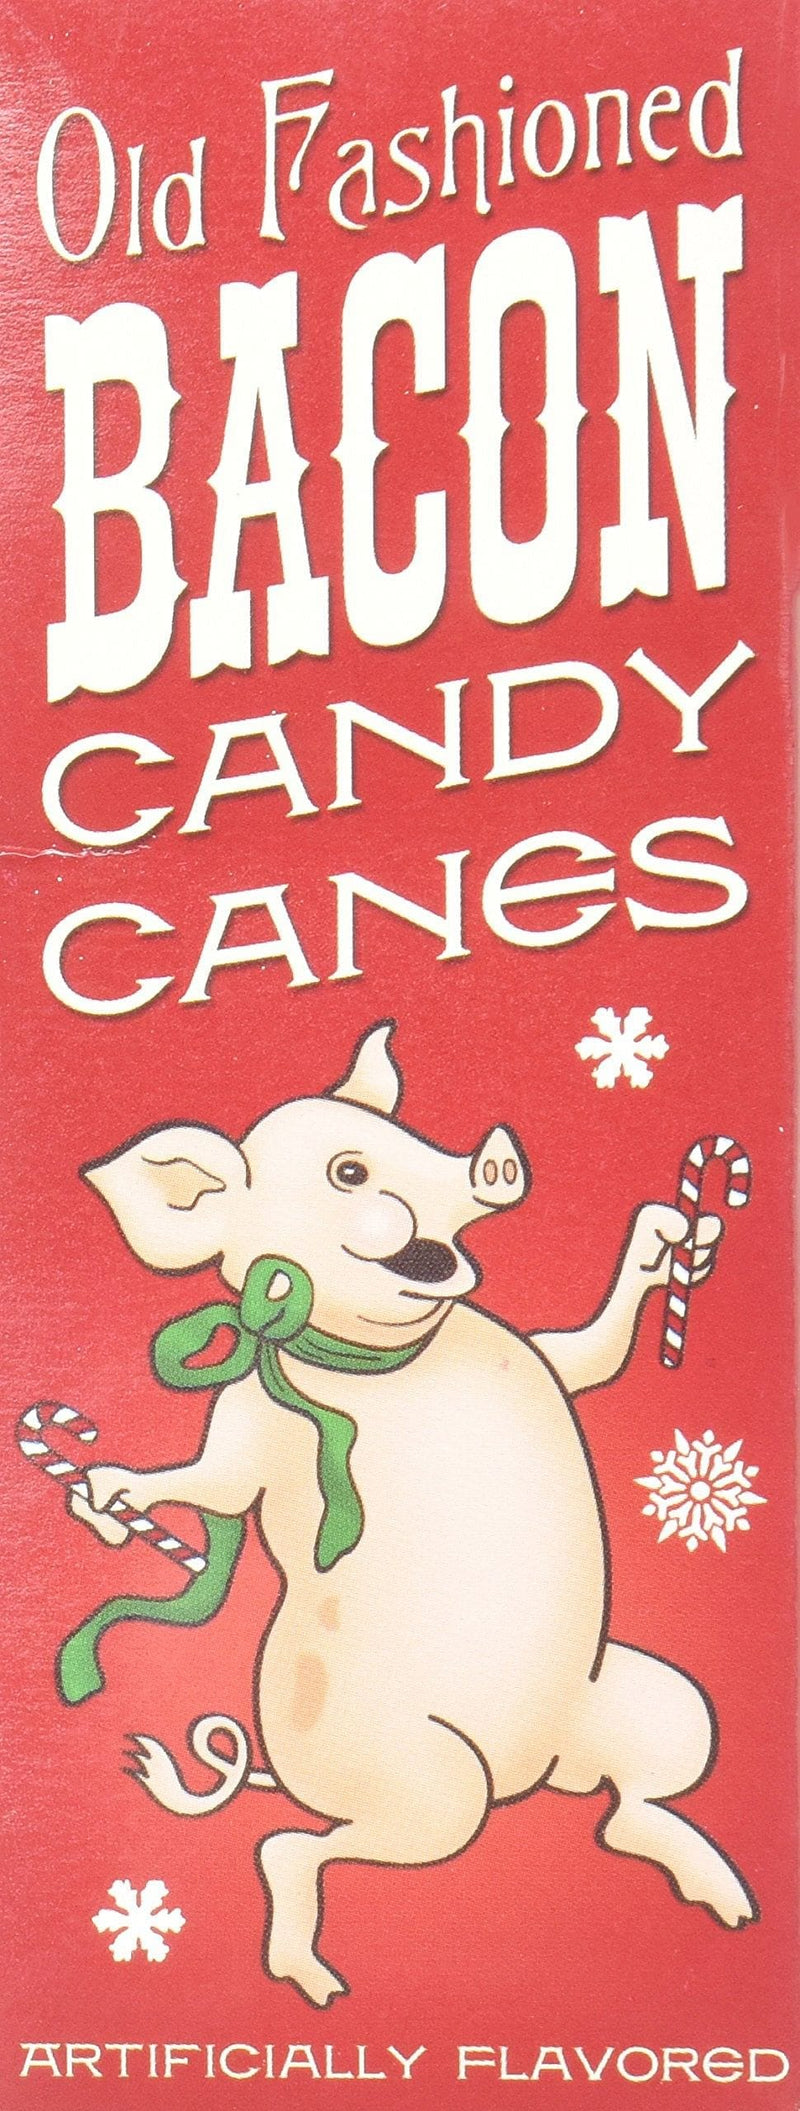 Bacon Candy Cane - Shelburne Country Store